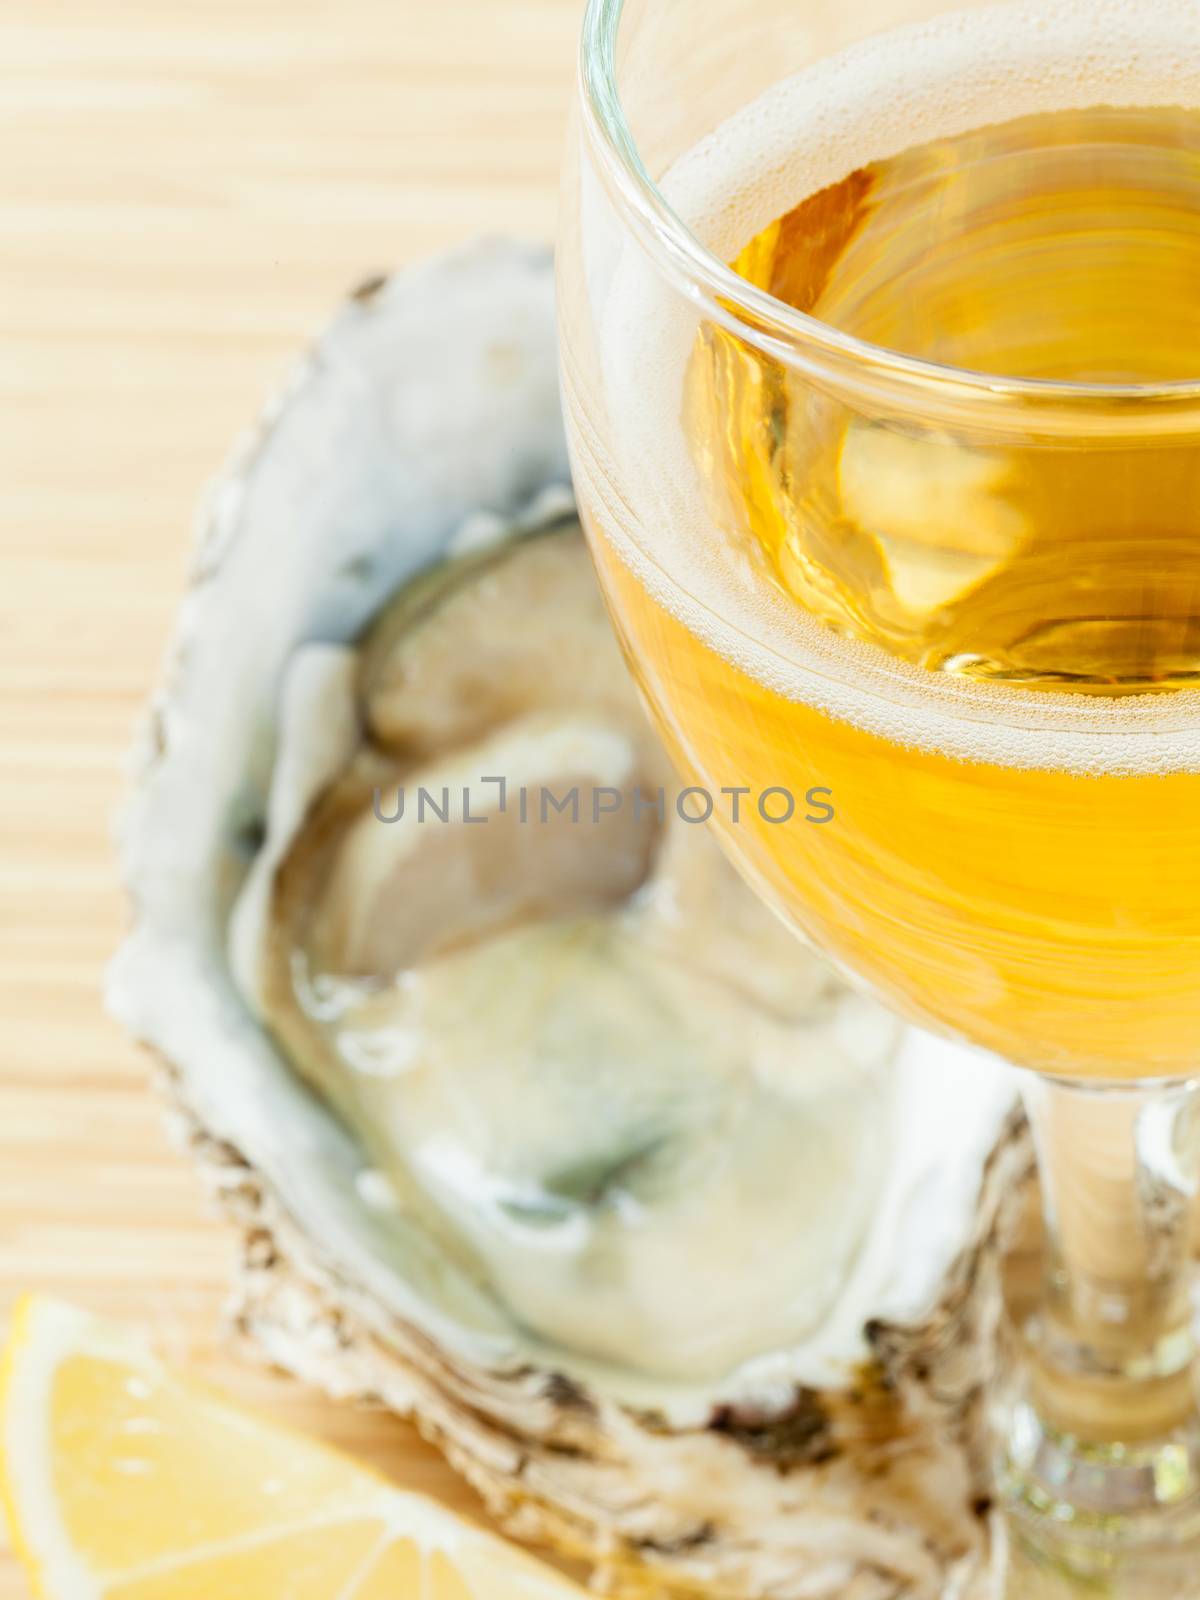 Fresh oysters with lemon and a glass of wine on a wooden table . by kerdkanno